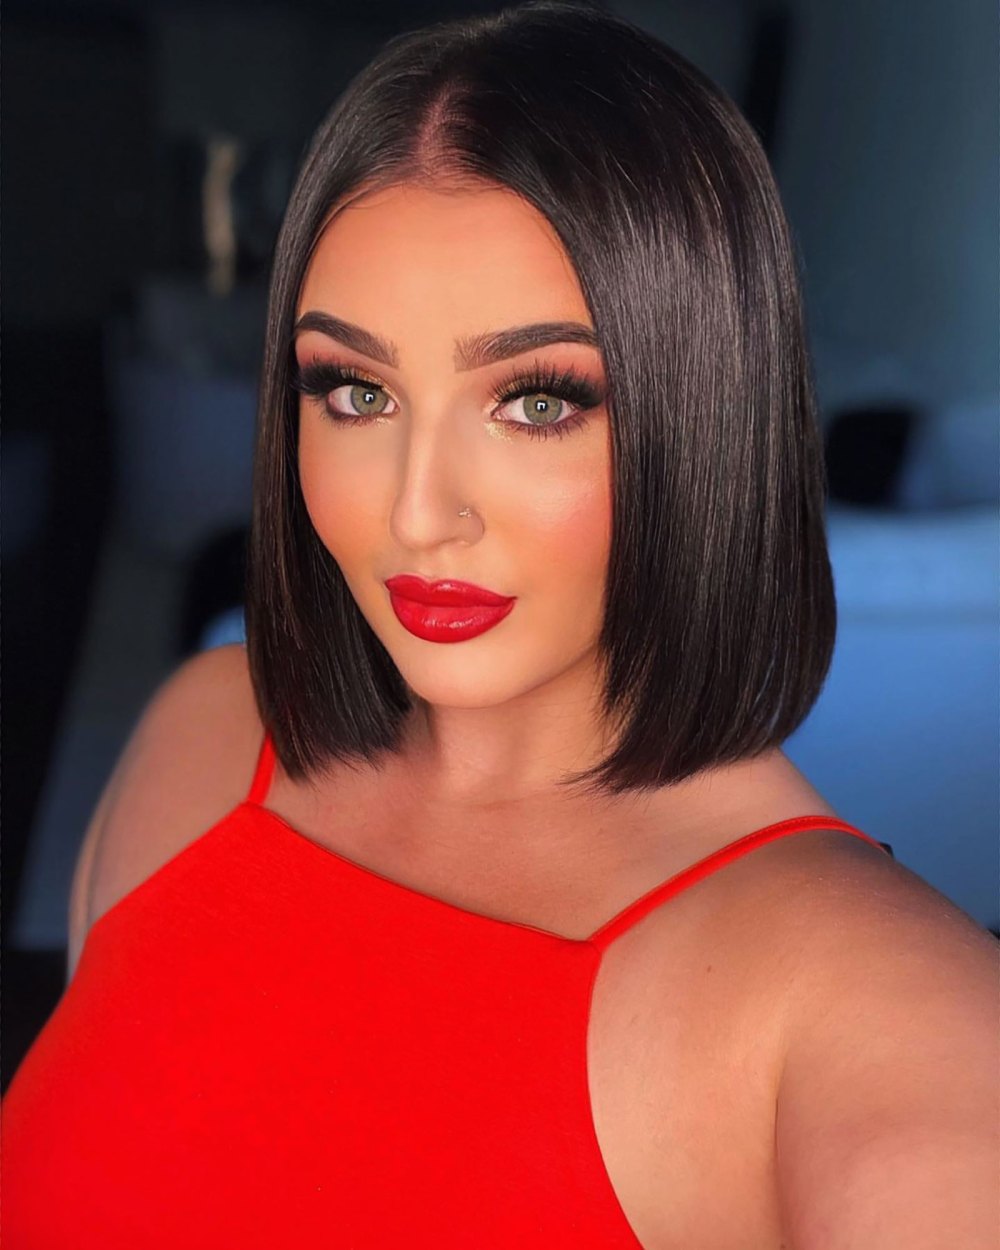 Mikayla Nogueira: 5 Things to Know About the Beauty Influencer